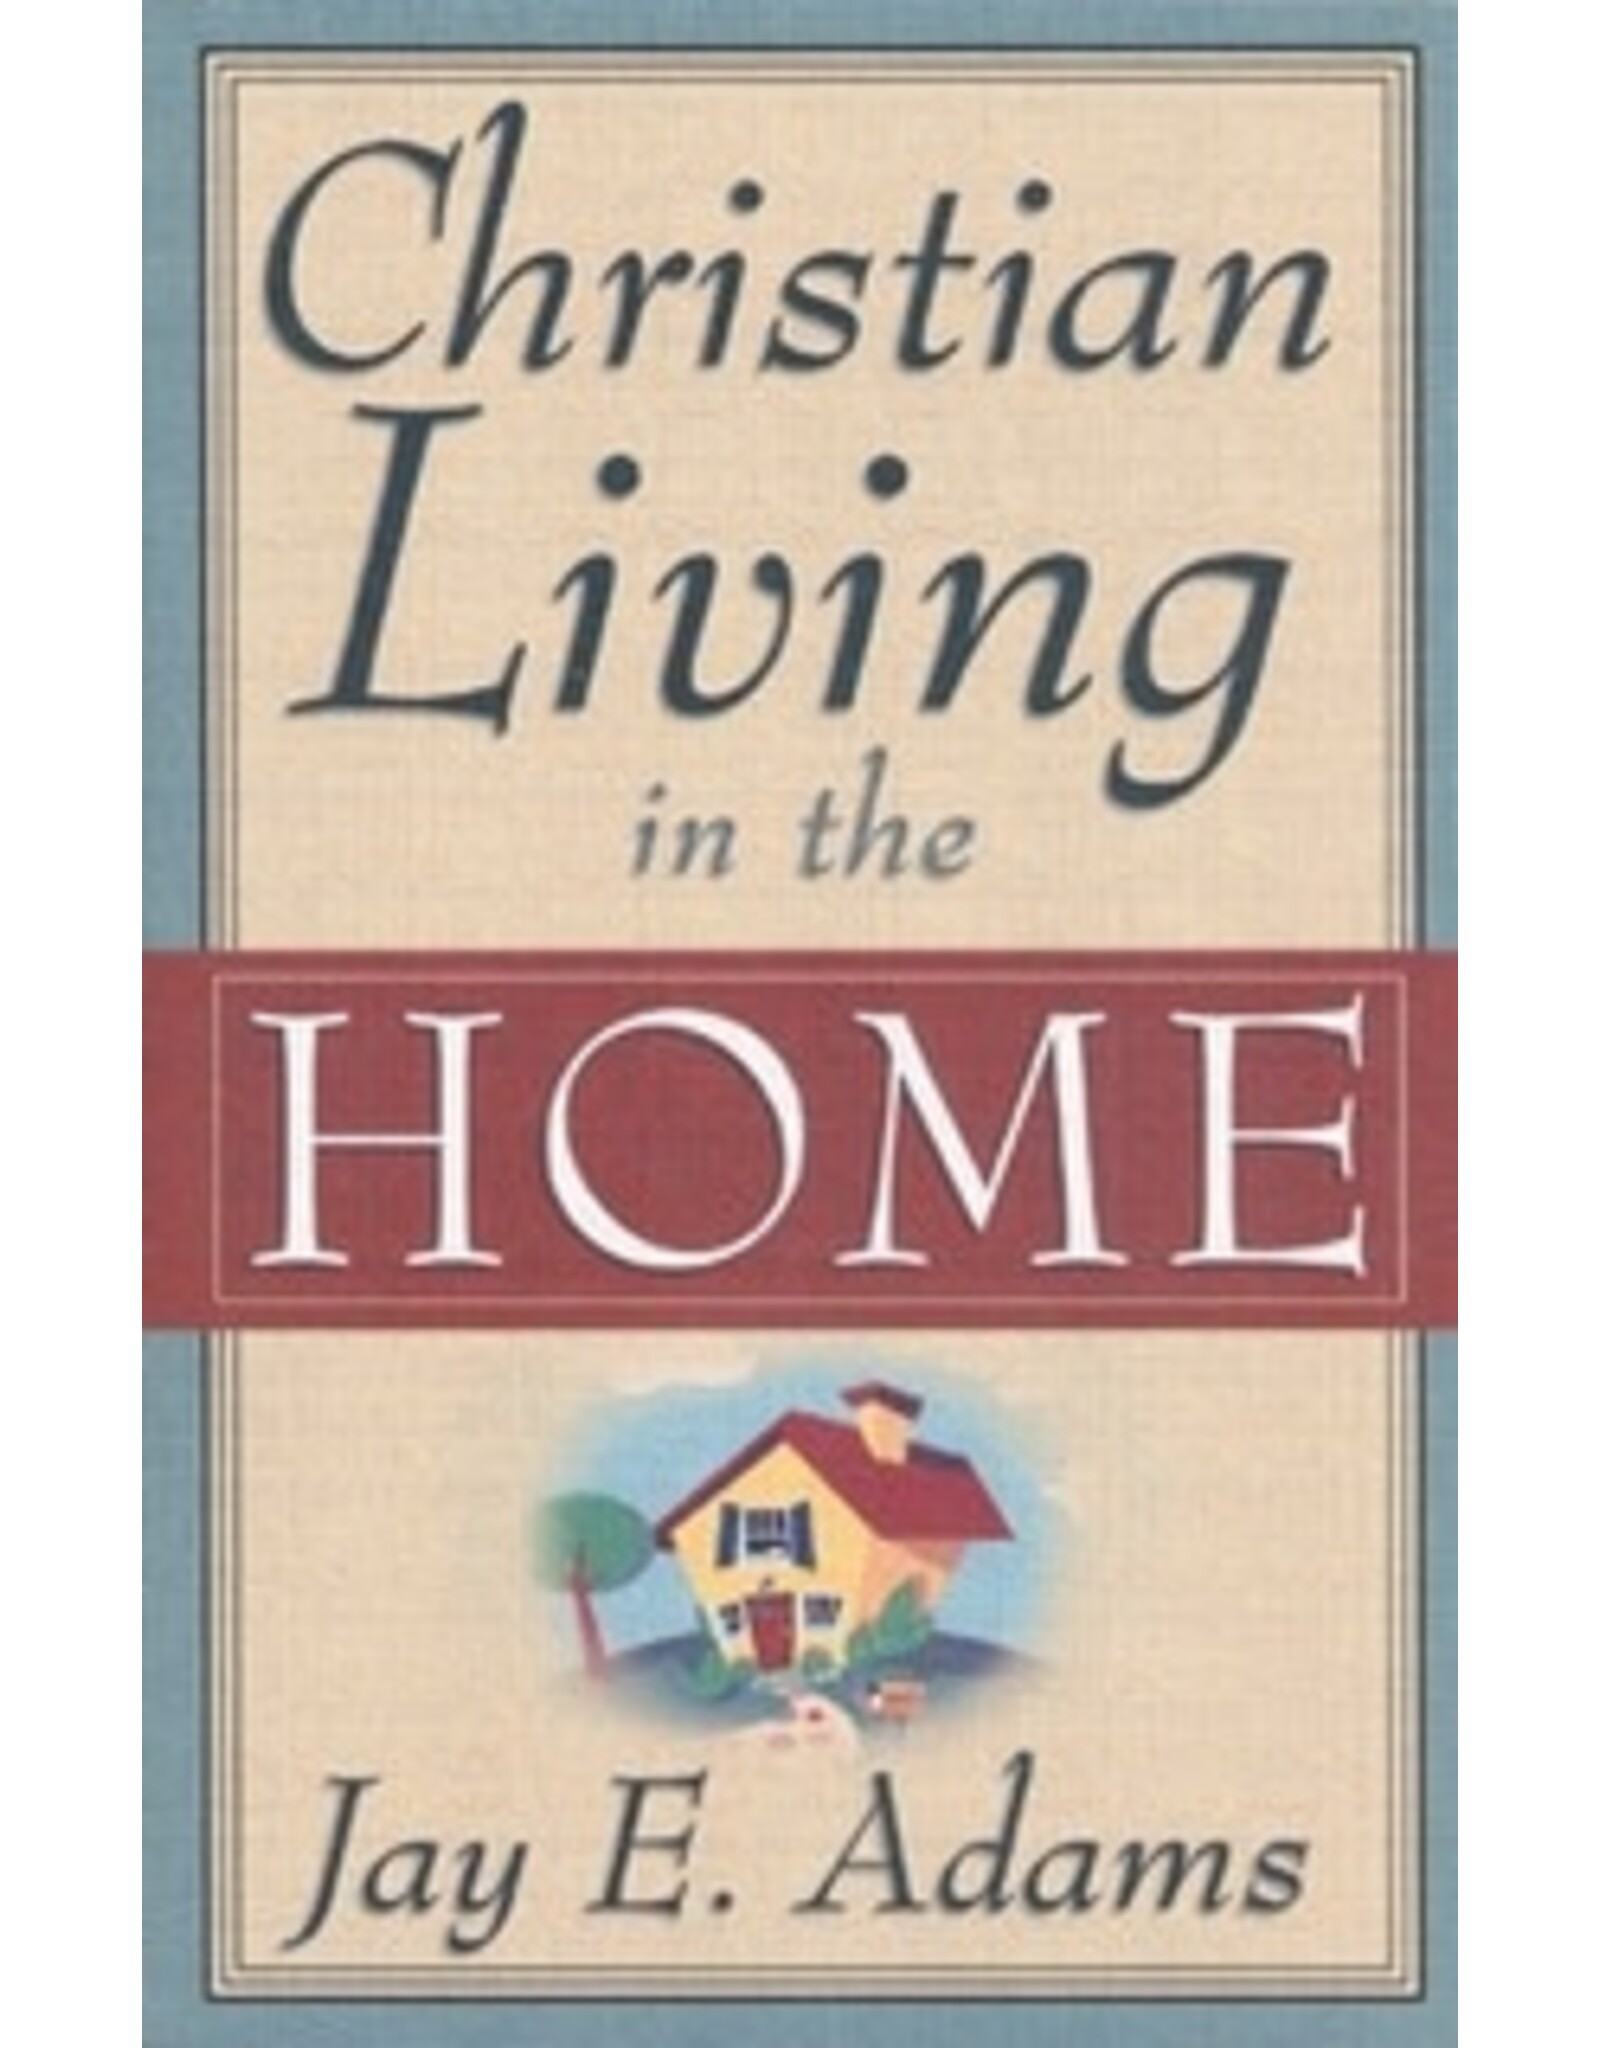 Jay E Adams Christian Living in the Home